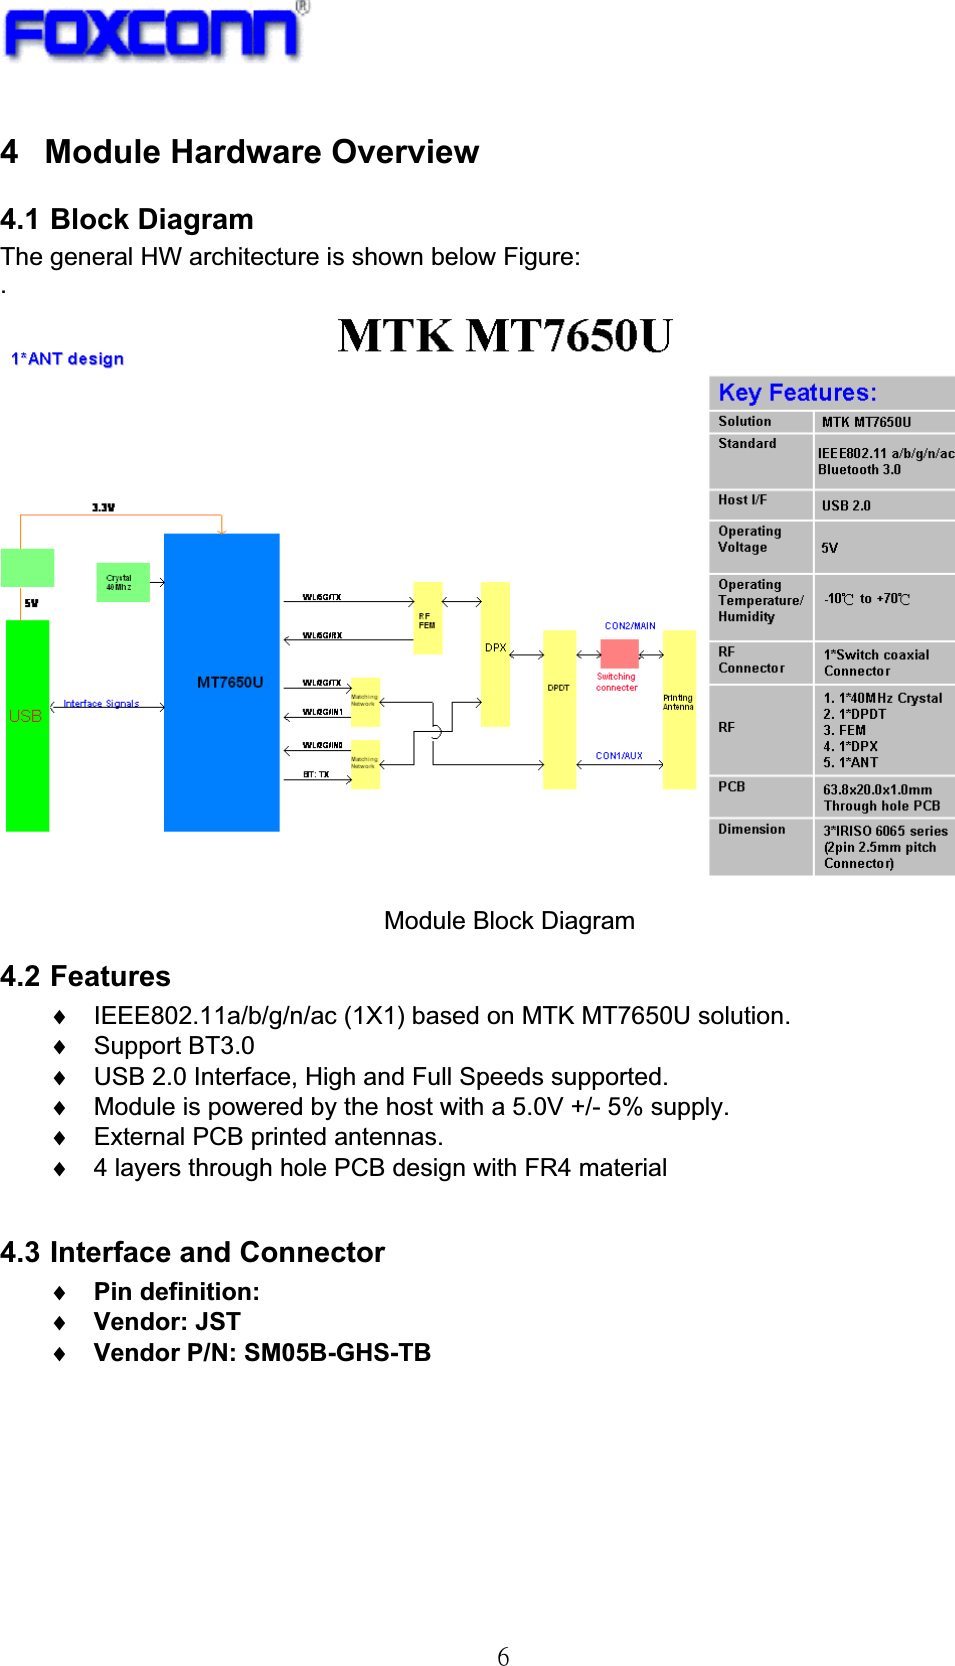 !7!4  Module Hardware Overview 4.1 Block Diagram The general HW architecture is shown below Figure: .Module Block Diagram 4.2 Features i  IEEE802.11a/b/g/n/ac (1X1) based on MTK MT7650U solution. i Support BT3.0 i  USB 2.0 Interface, High and Full Speeds supported. i  Module is powered by the host with a 5.0V +/- 5% supply. i  External PCB printed antennas. i  4 layers through hole PCB design with FR4 material 4.3 Interface and Connector iPin definition:   iVendor: JST iVendor P/N: SM05B-GHS-TB 